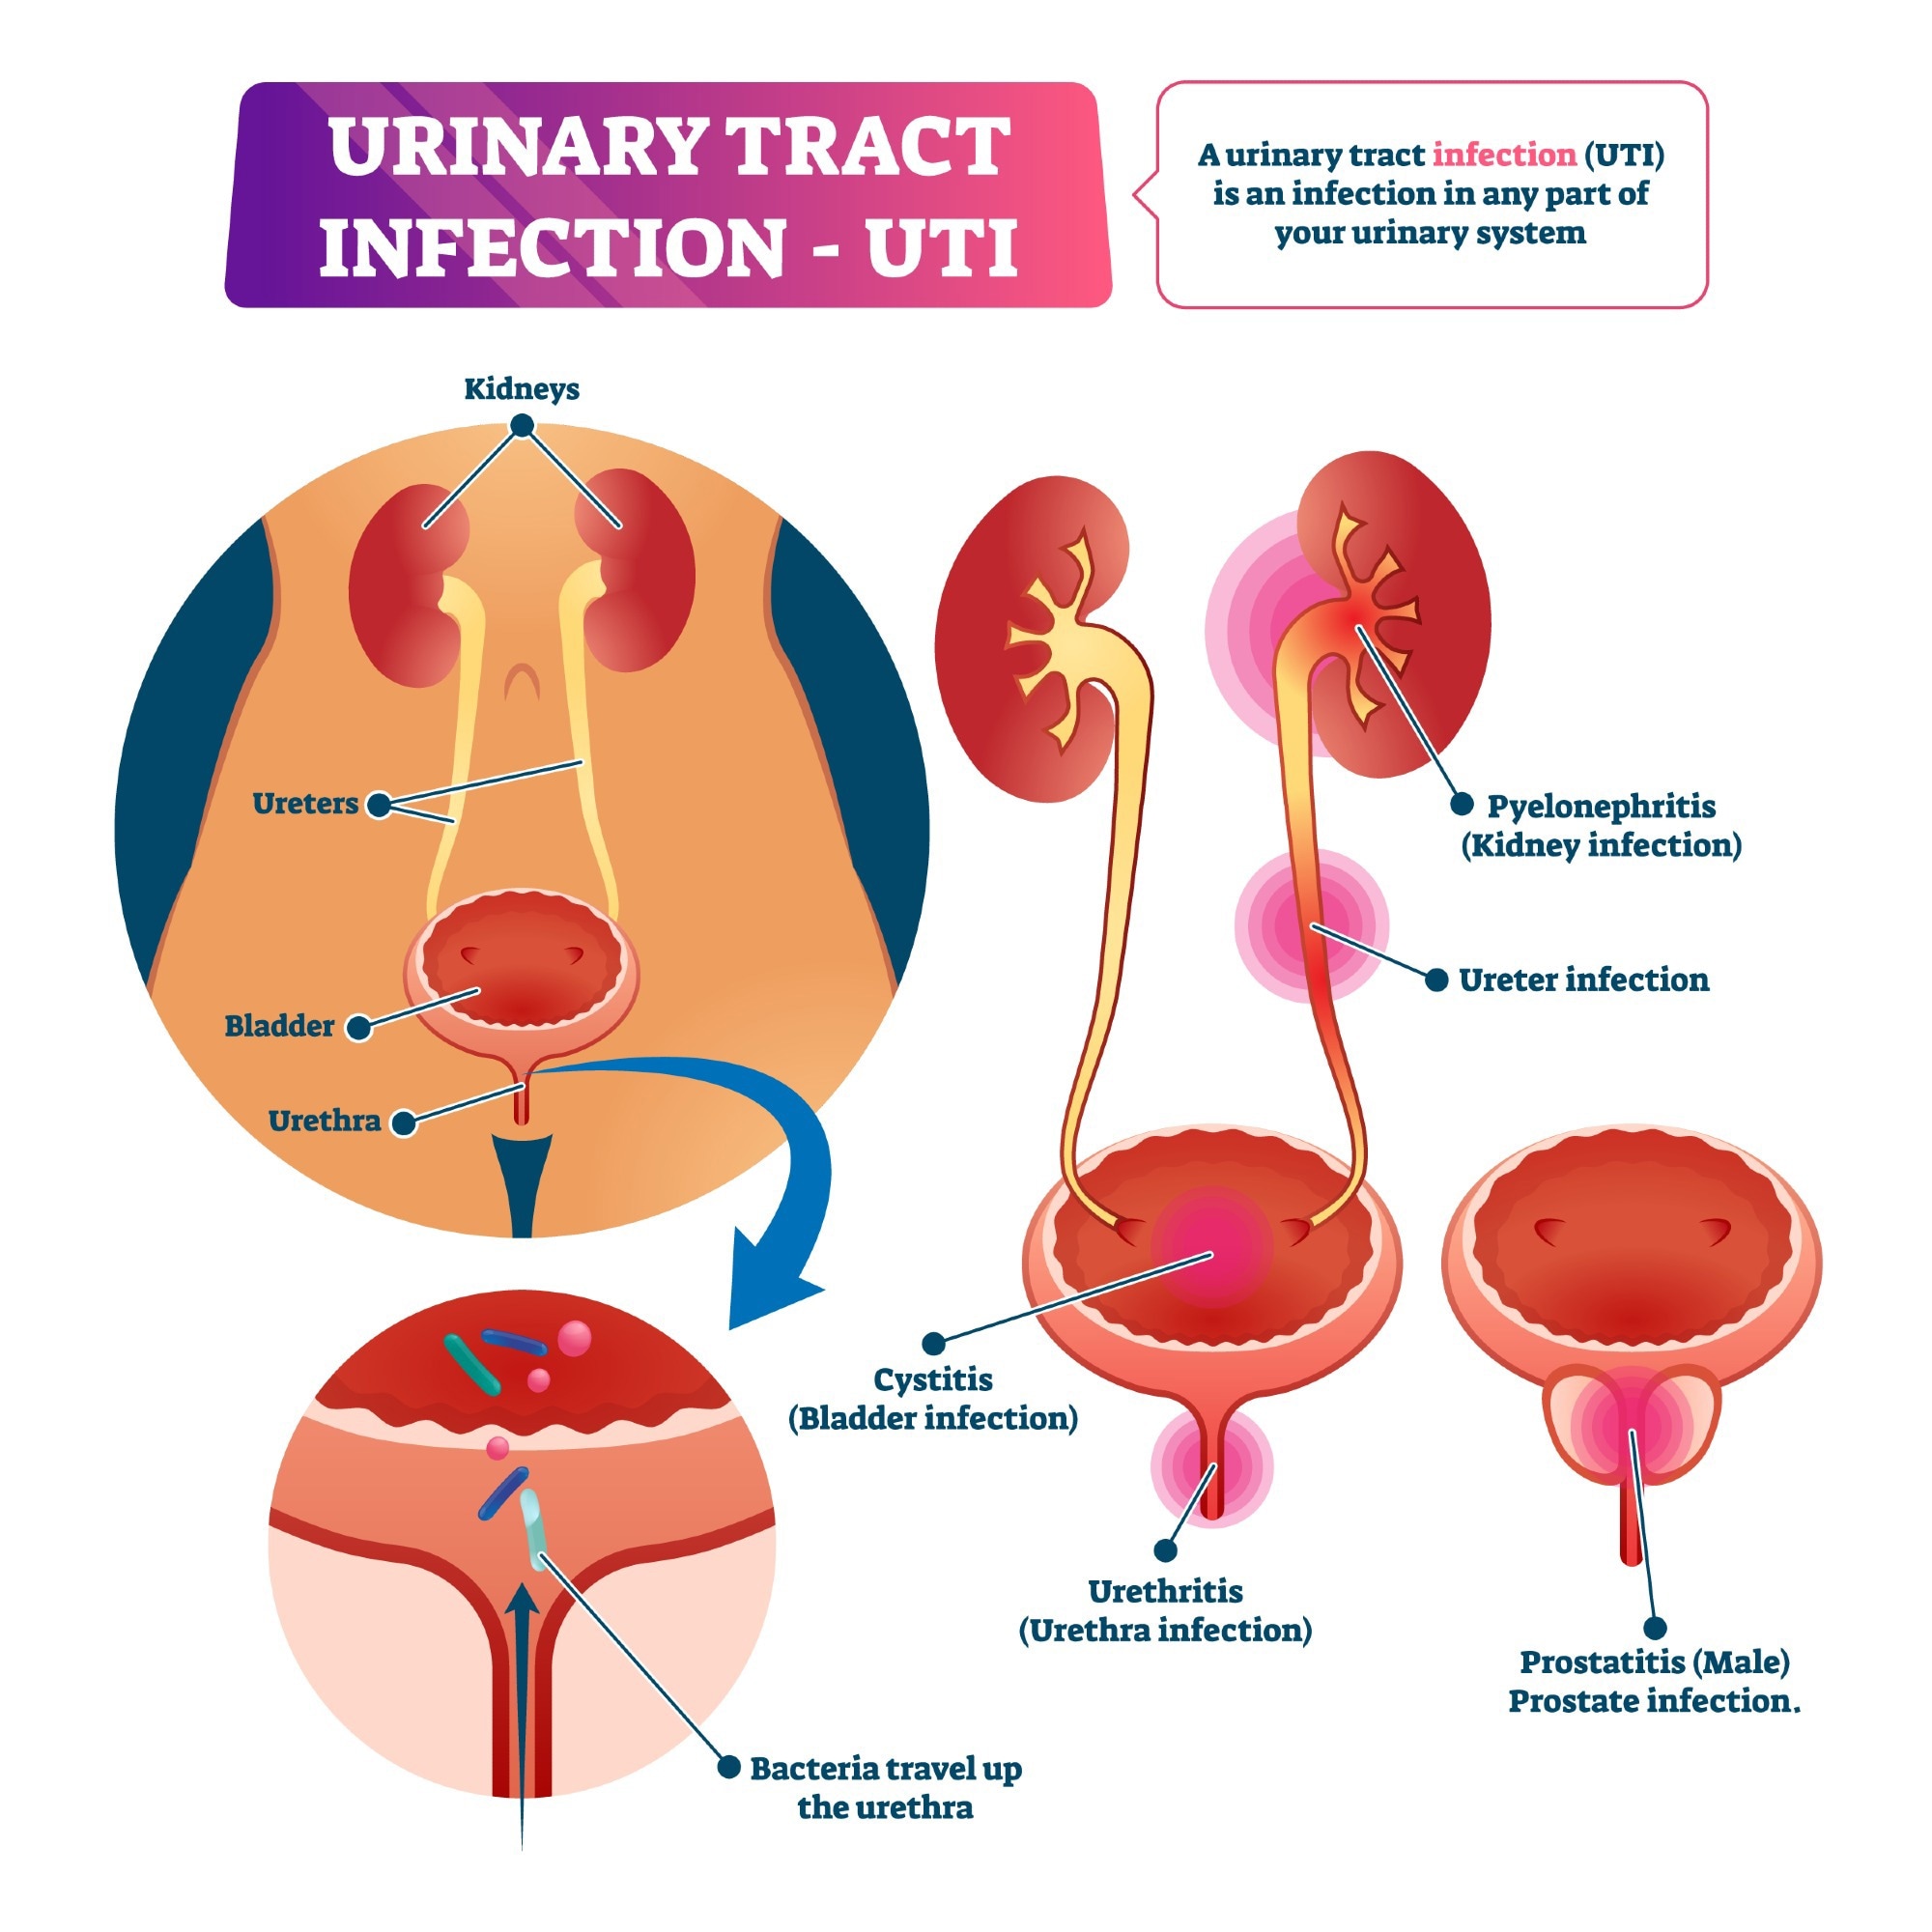 Frequent Urination during Pregnancy  Frequent urination, Pregnancy, 2nd  trimester of pregnancy